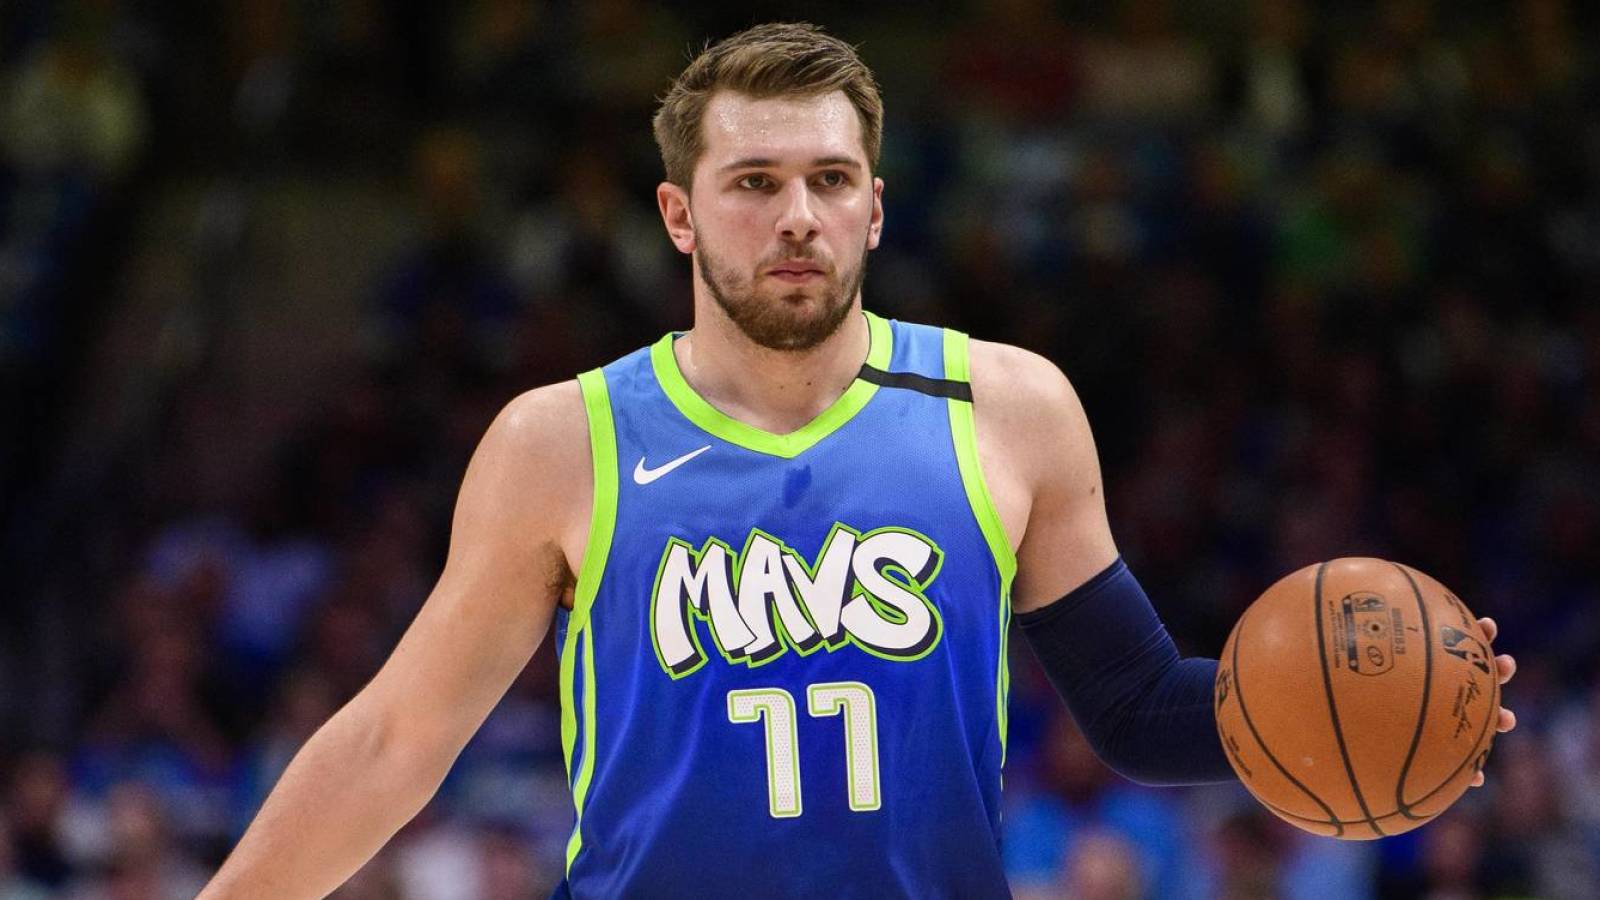 Luka Doncic rips jersey out of frustration after missing free